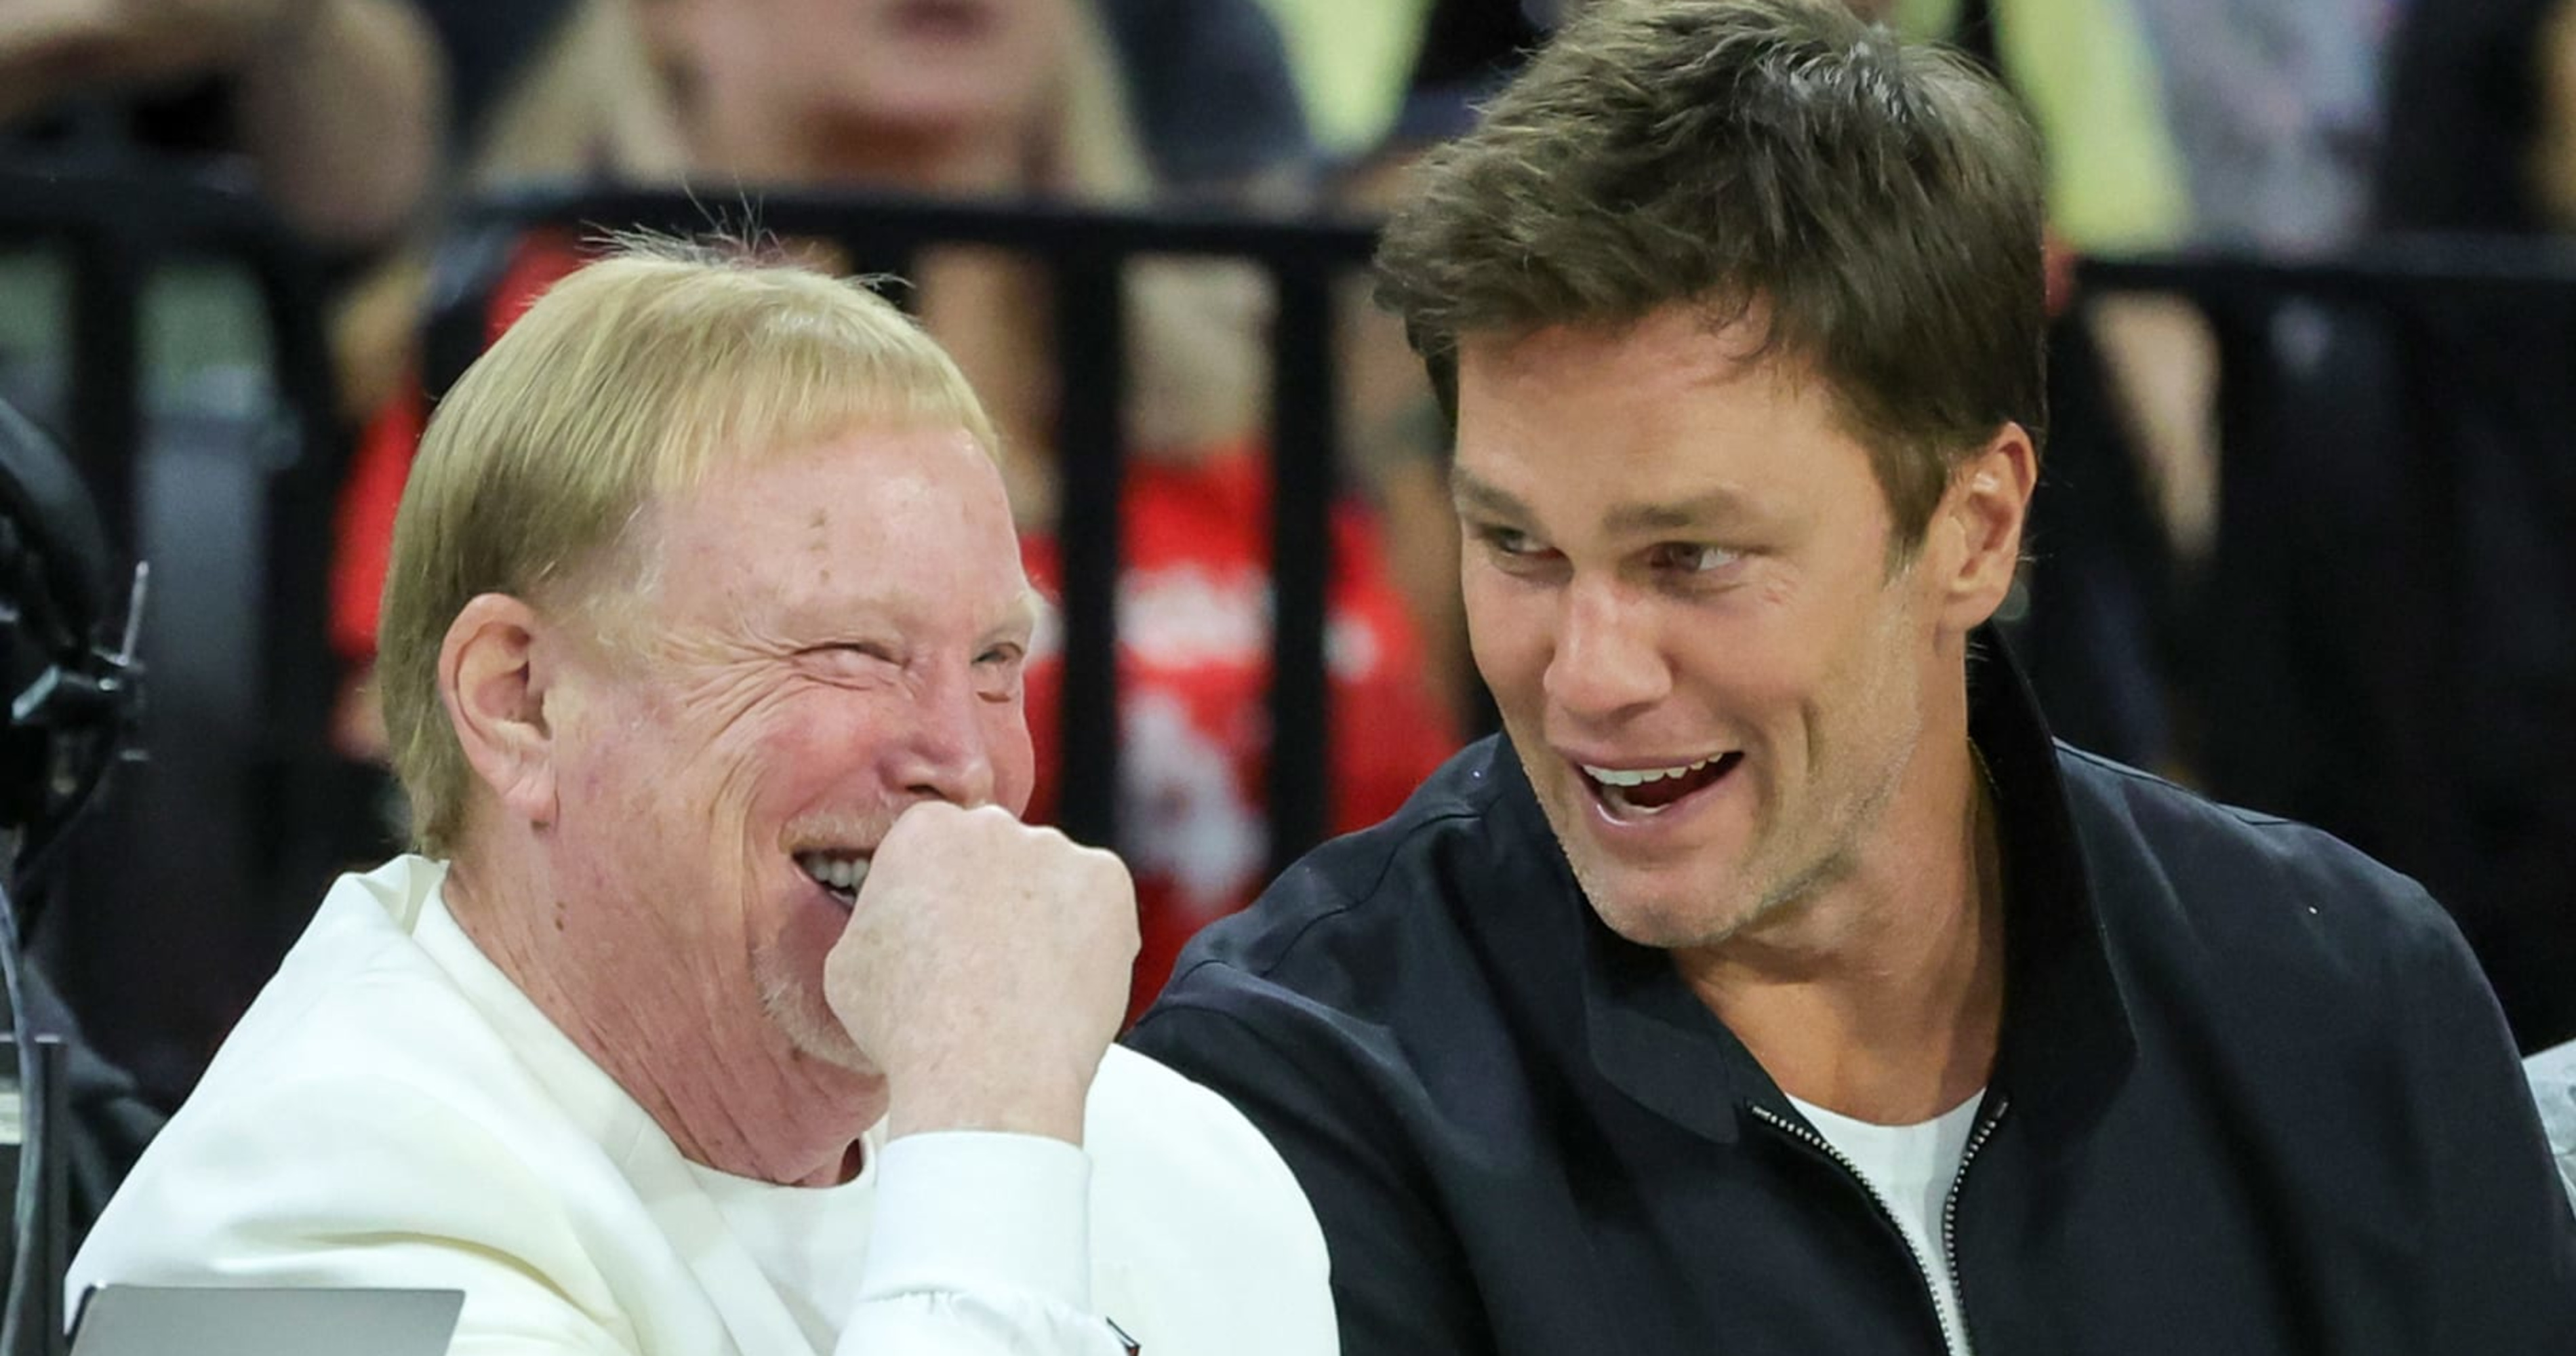 Raiders Insider on Tom Brady: 'Don't Hold Your Breath' QB Unretires After NFL Draft